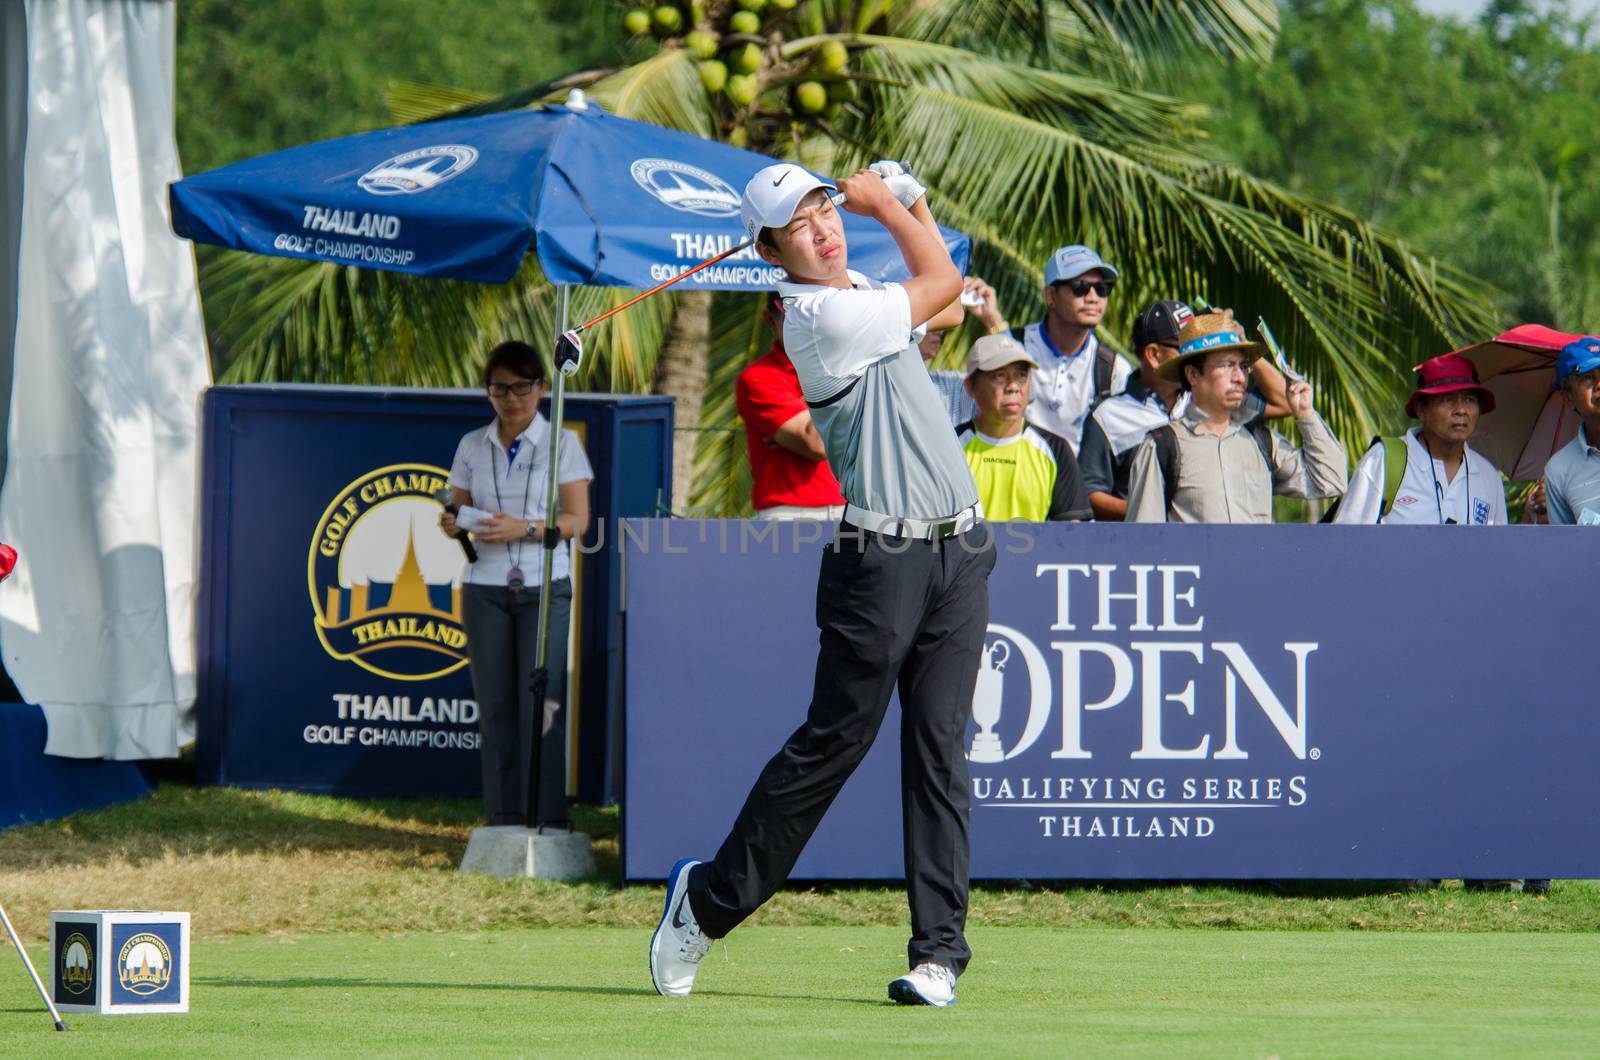 Jin Cheng (A) in Thailand Golf Championship 2015 by chatchai